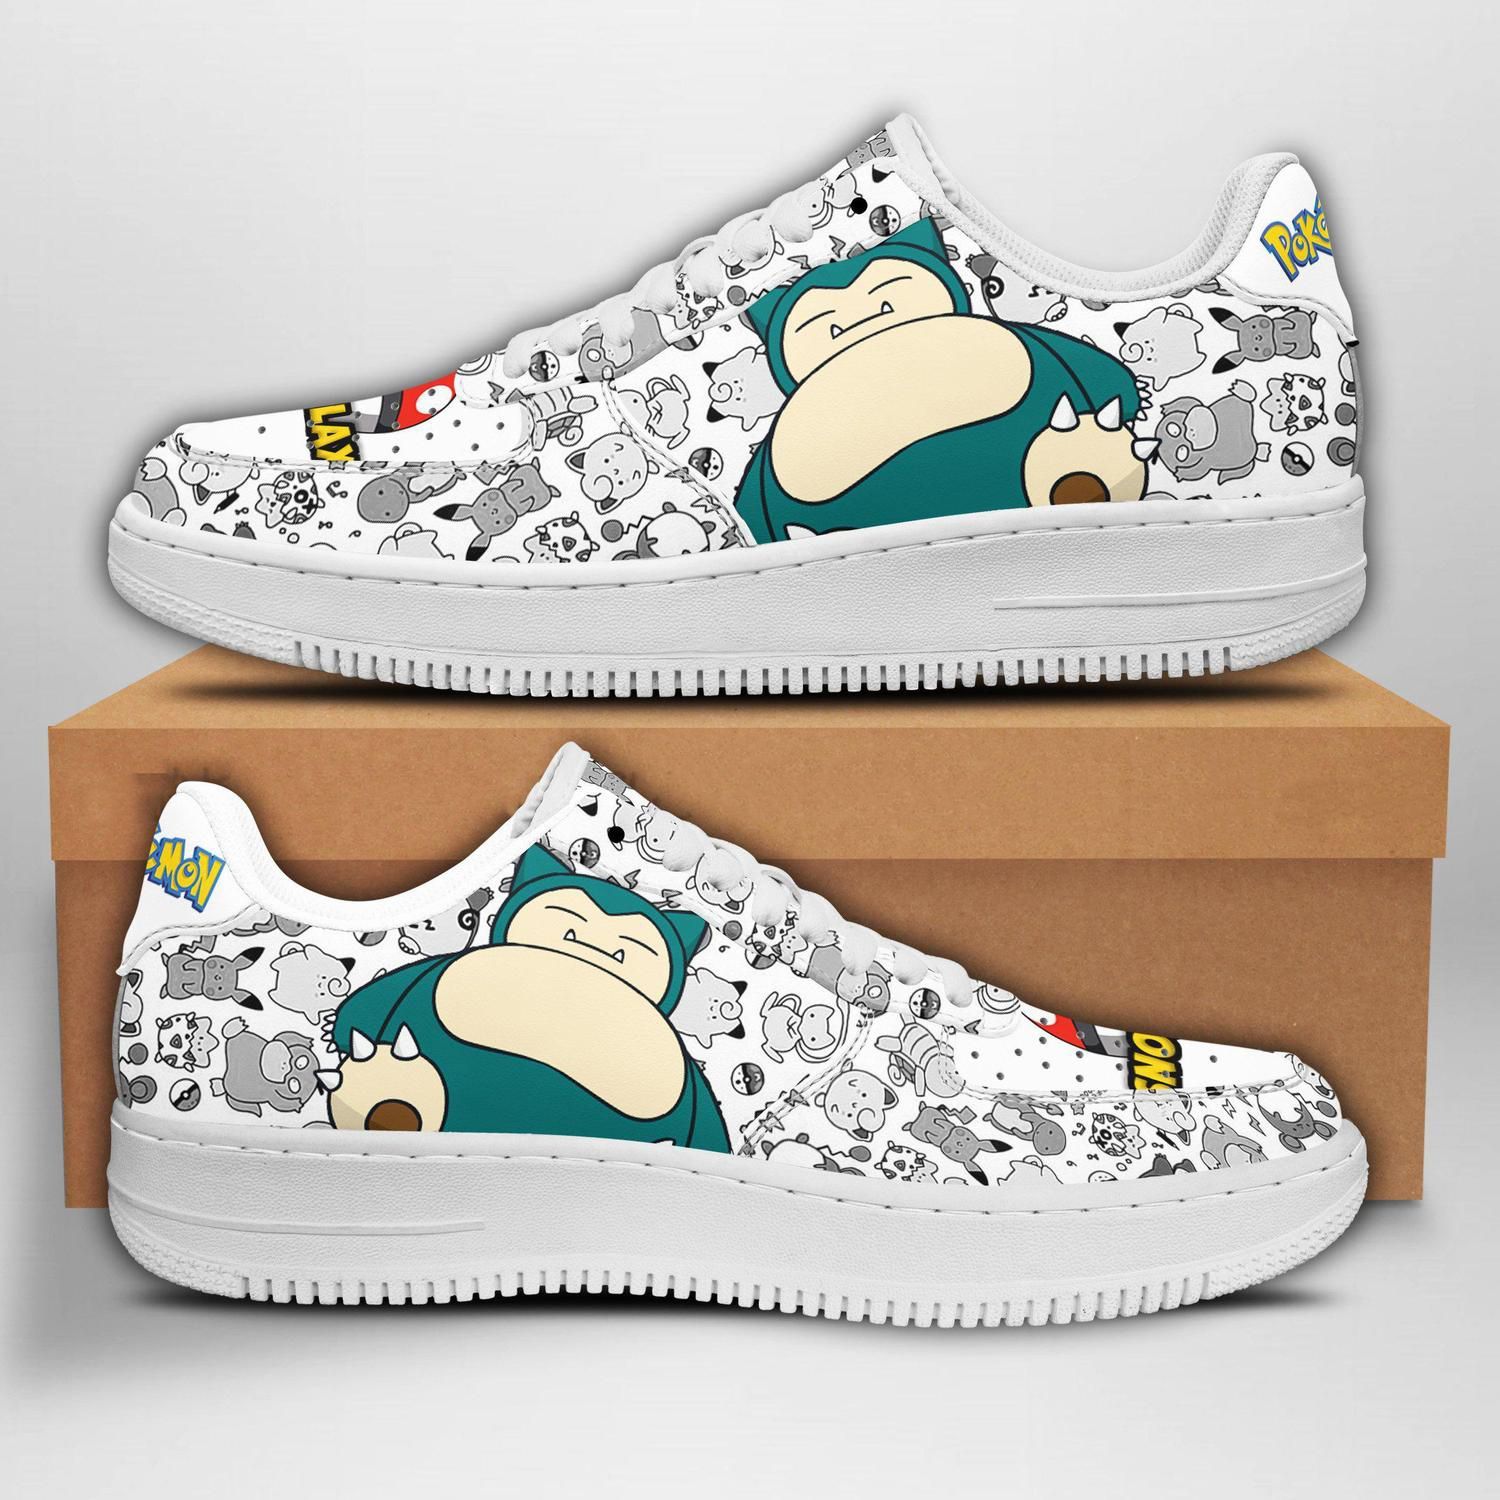 Snorlax Pokemon Air Force One Low Top Shoes Sneakers